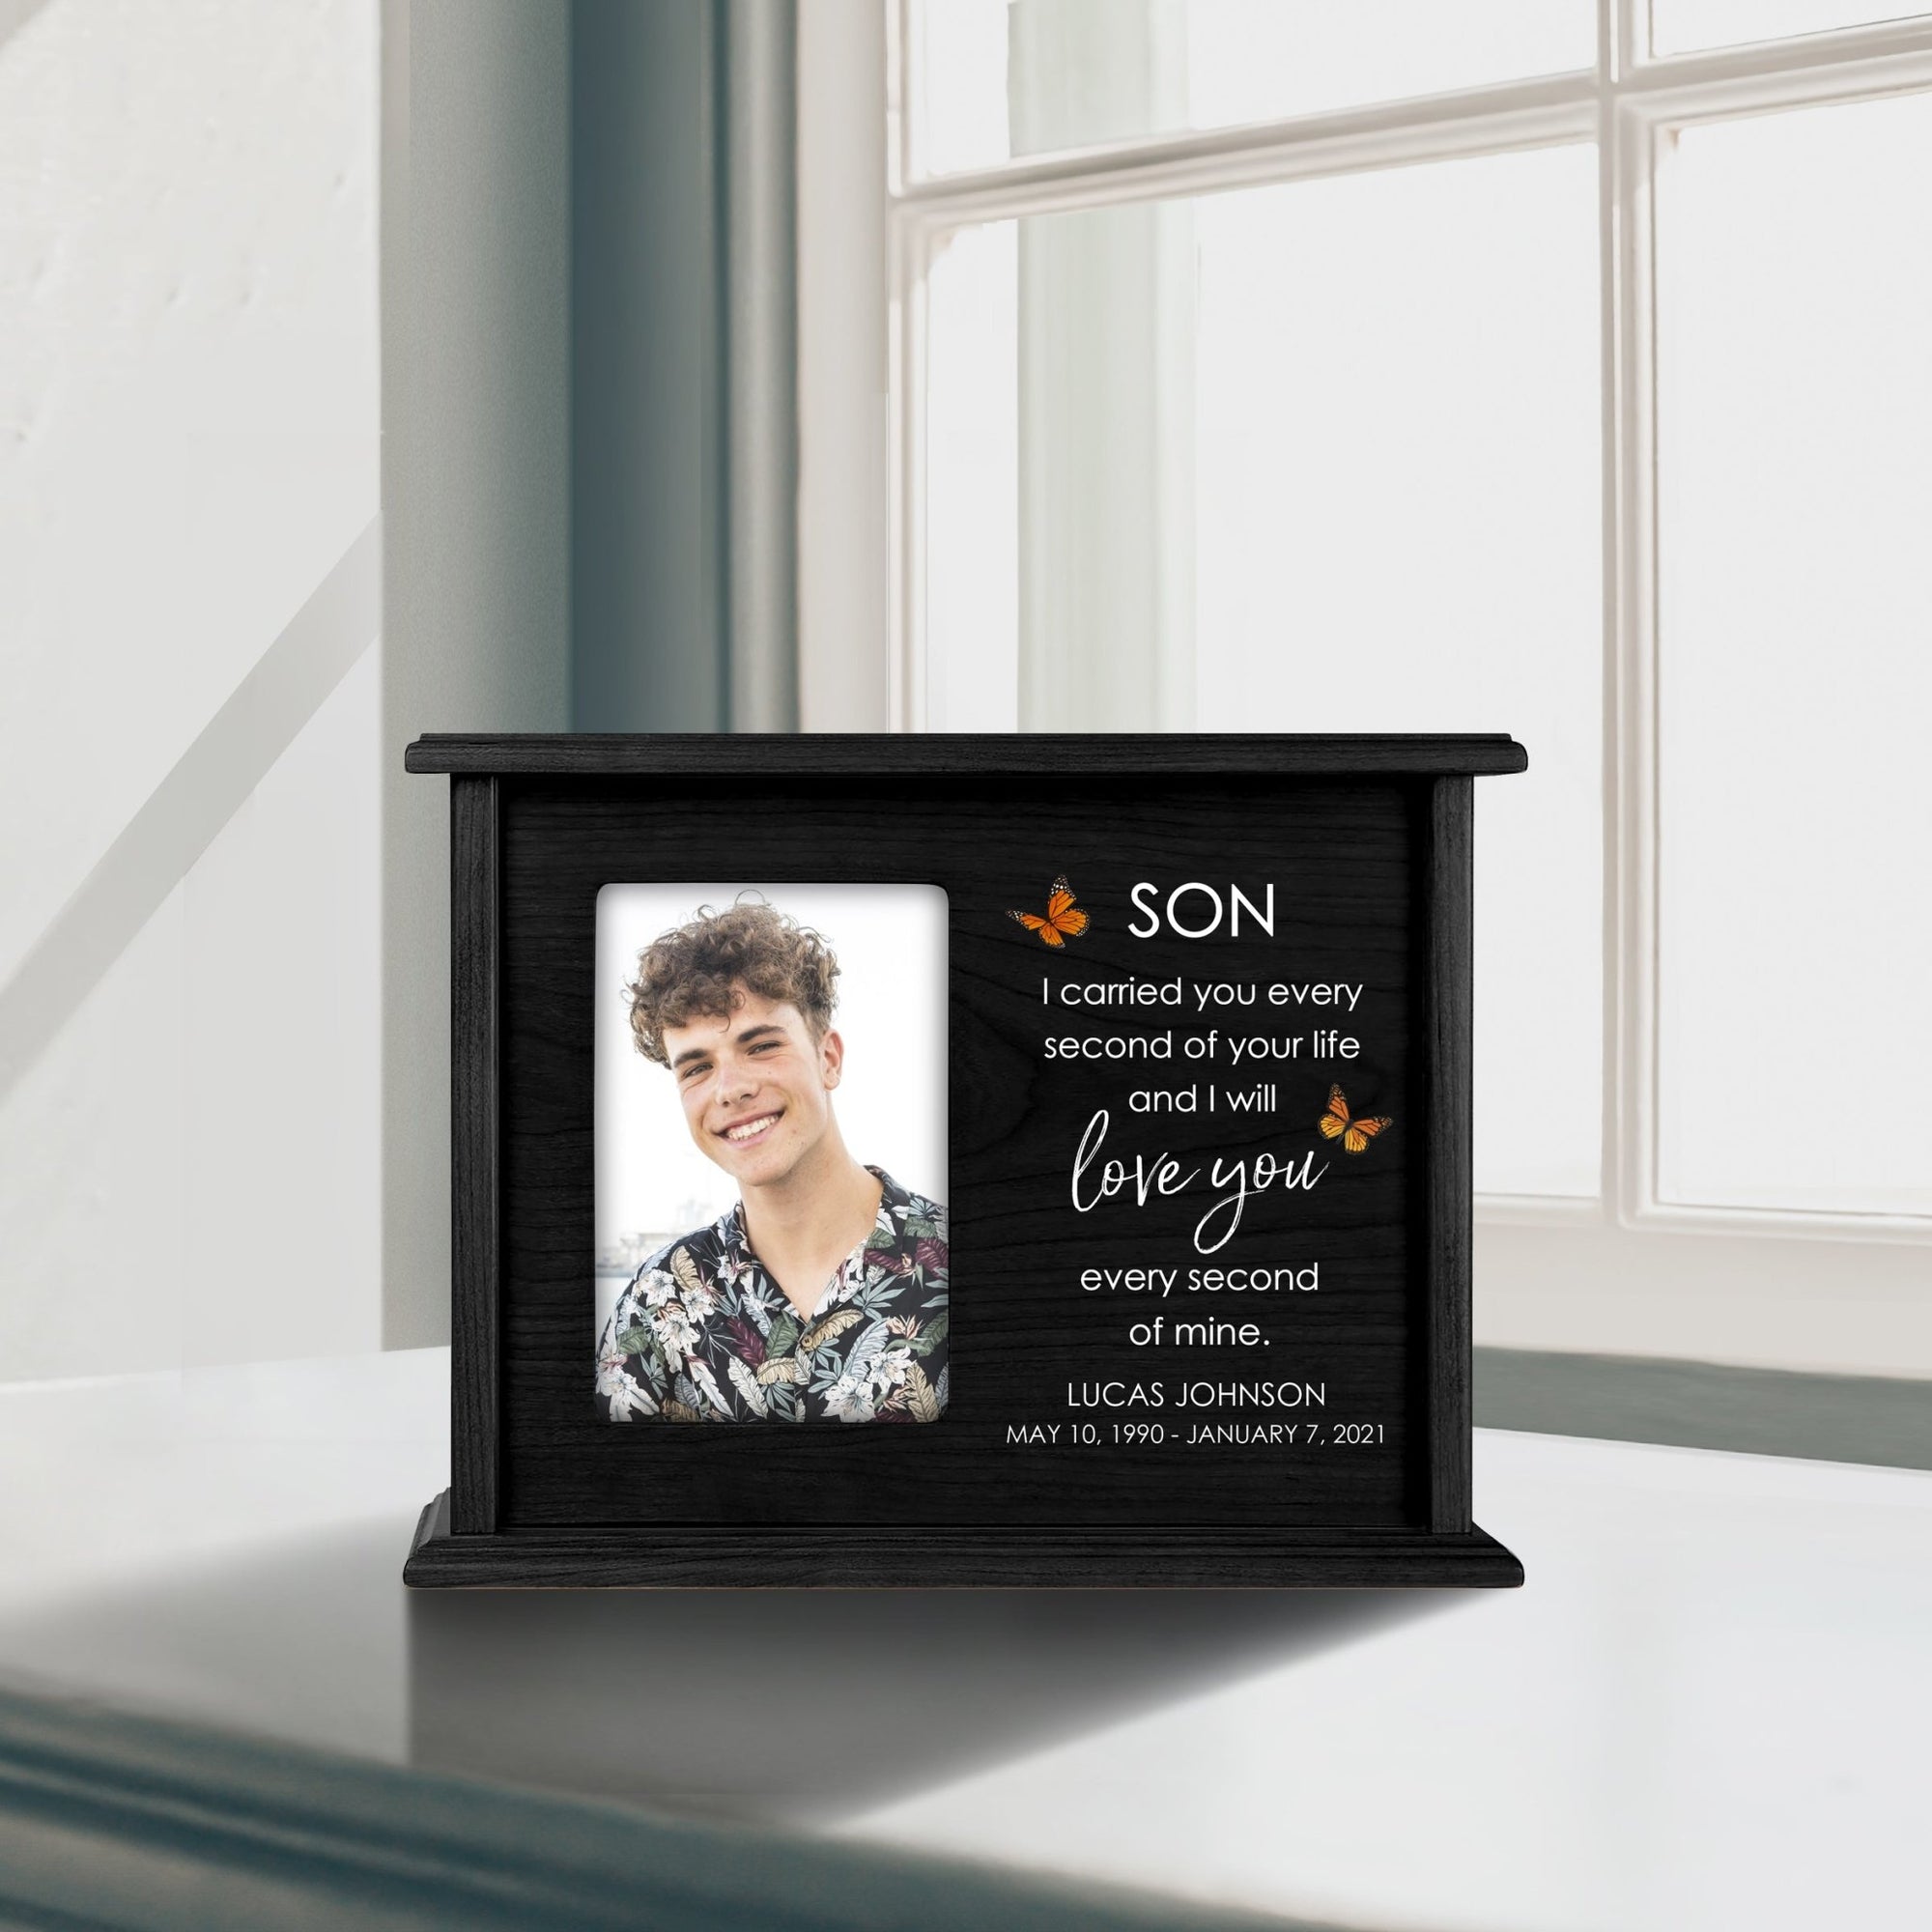 Custom Memorial Photo Cremation Urn Box for Human Ashes 